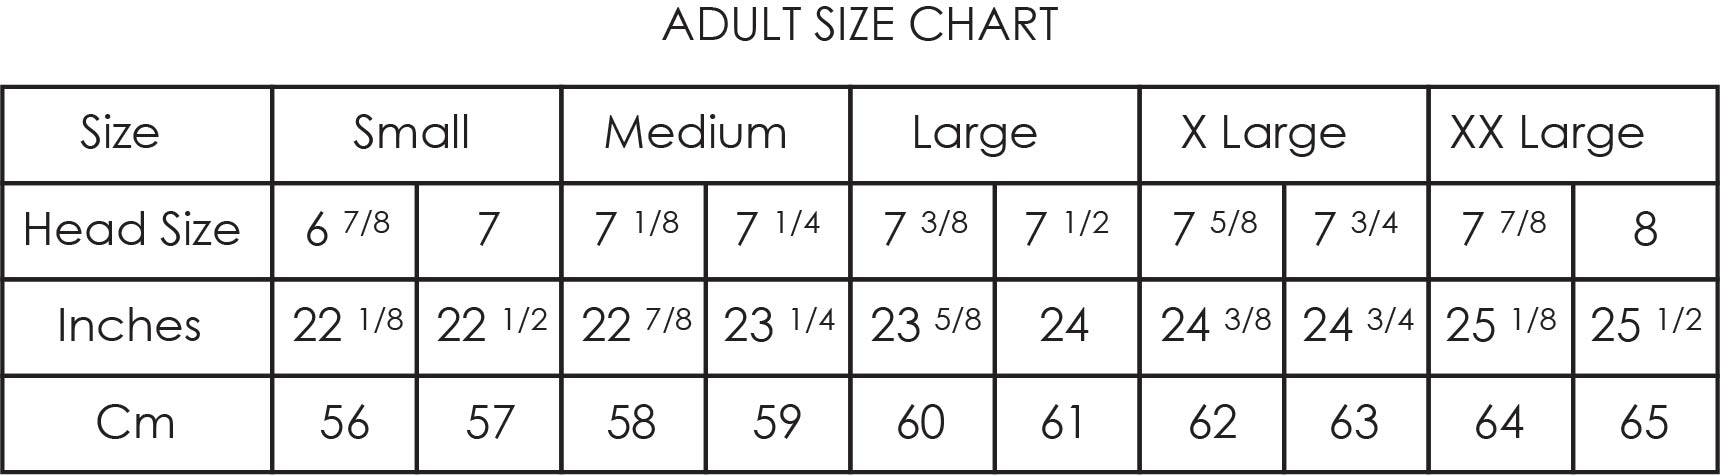 Hats and caps sizing chart